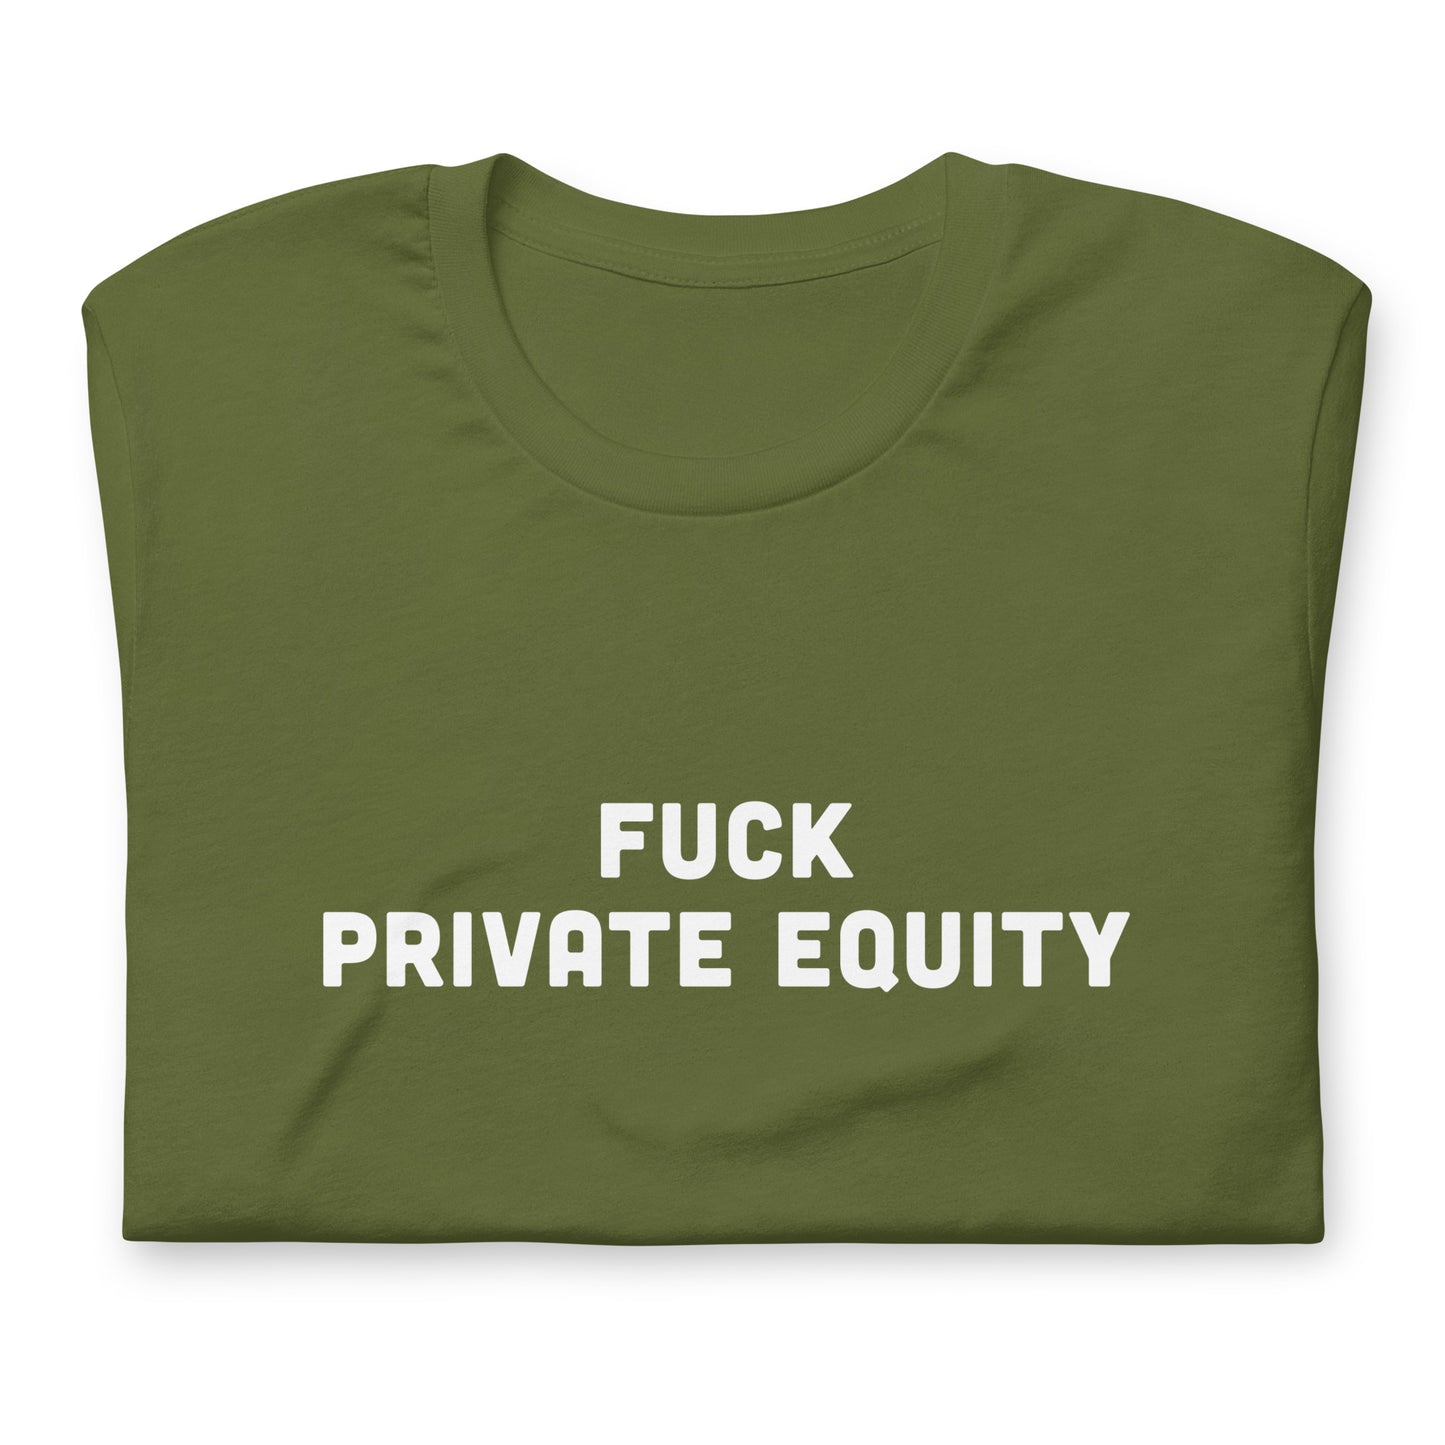 Fuck Private Equity T-Shirt Size S Color Navy